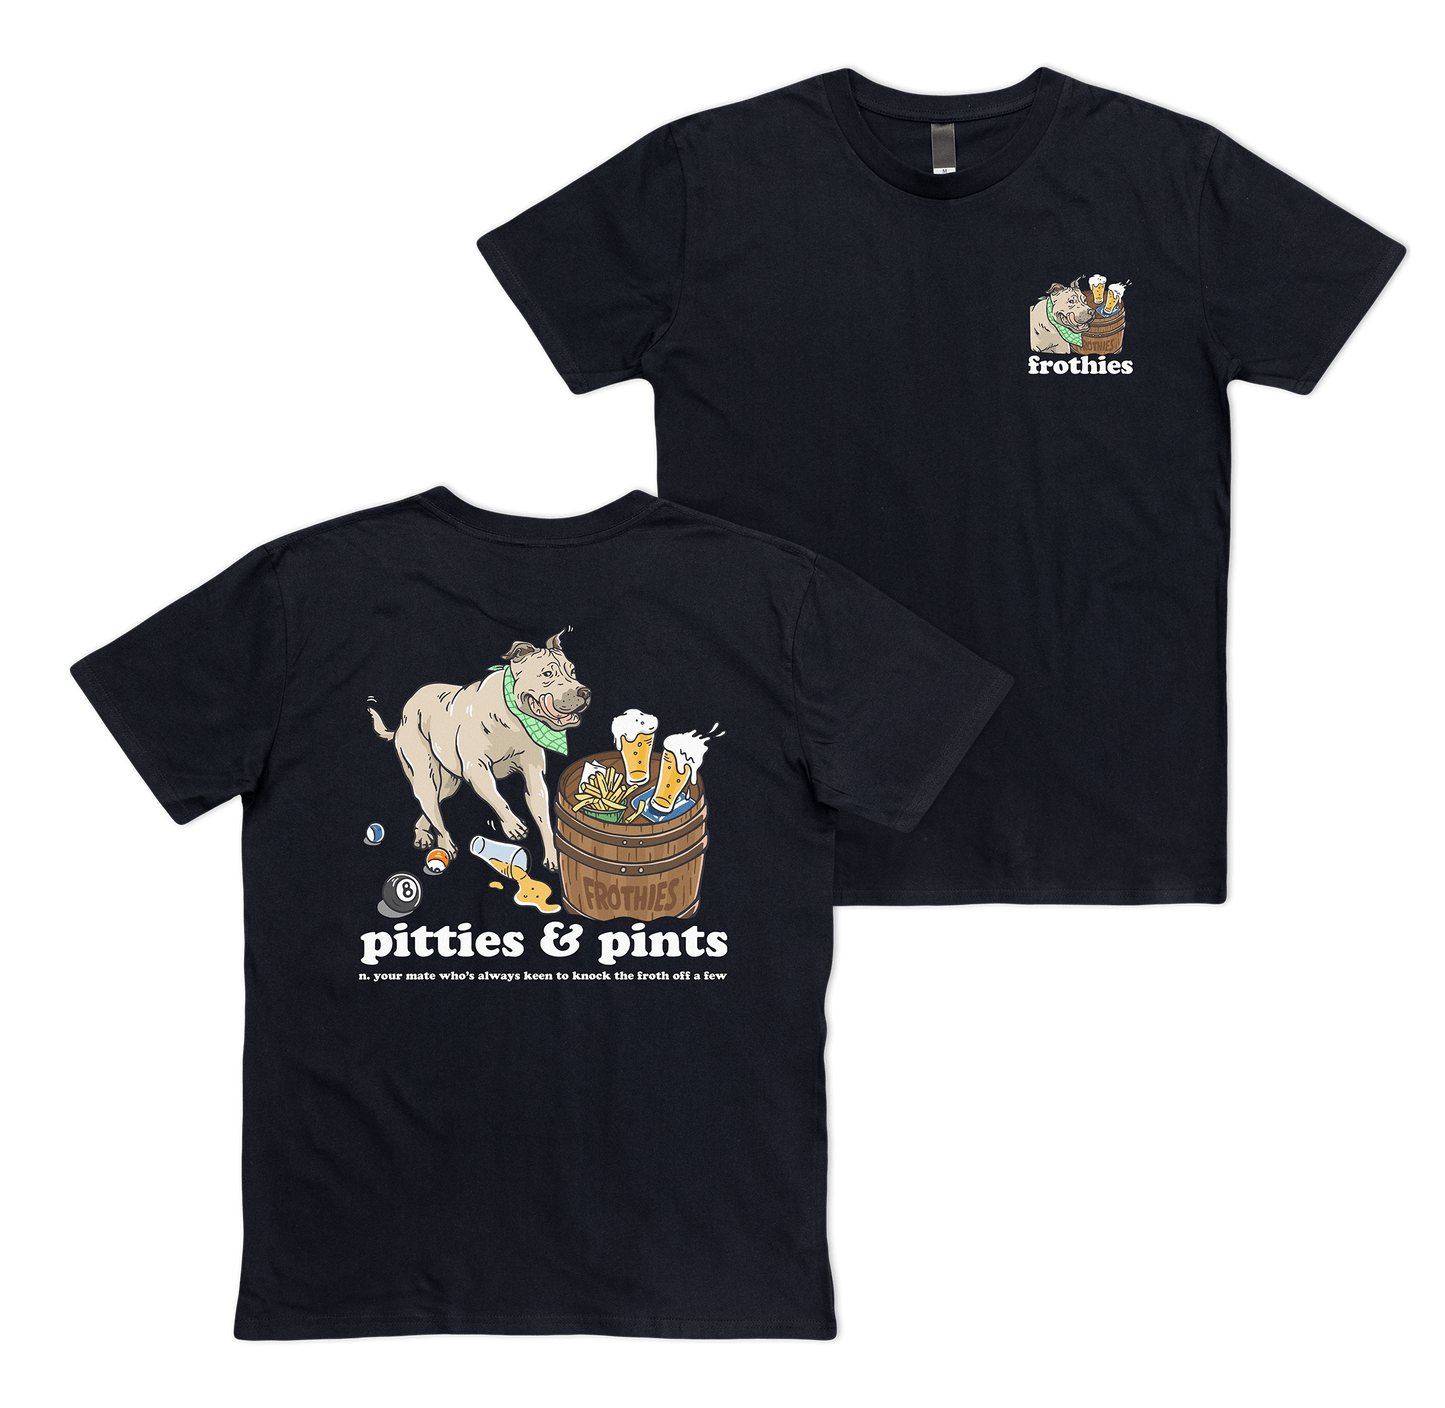 Pitties & Pints Tee T-Shirt Frothies